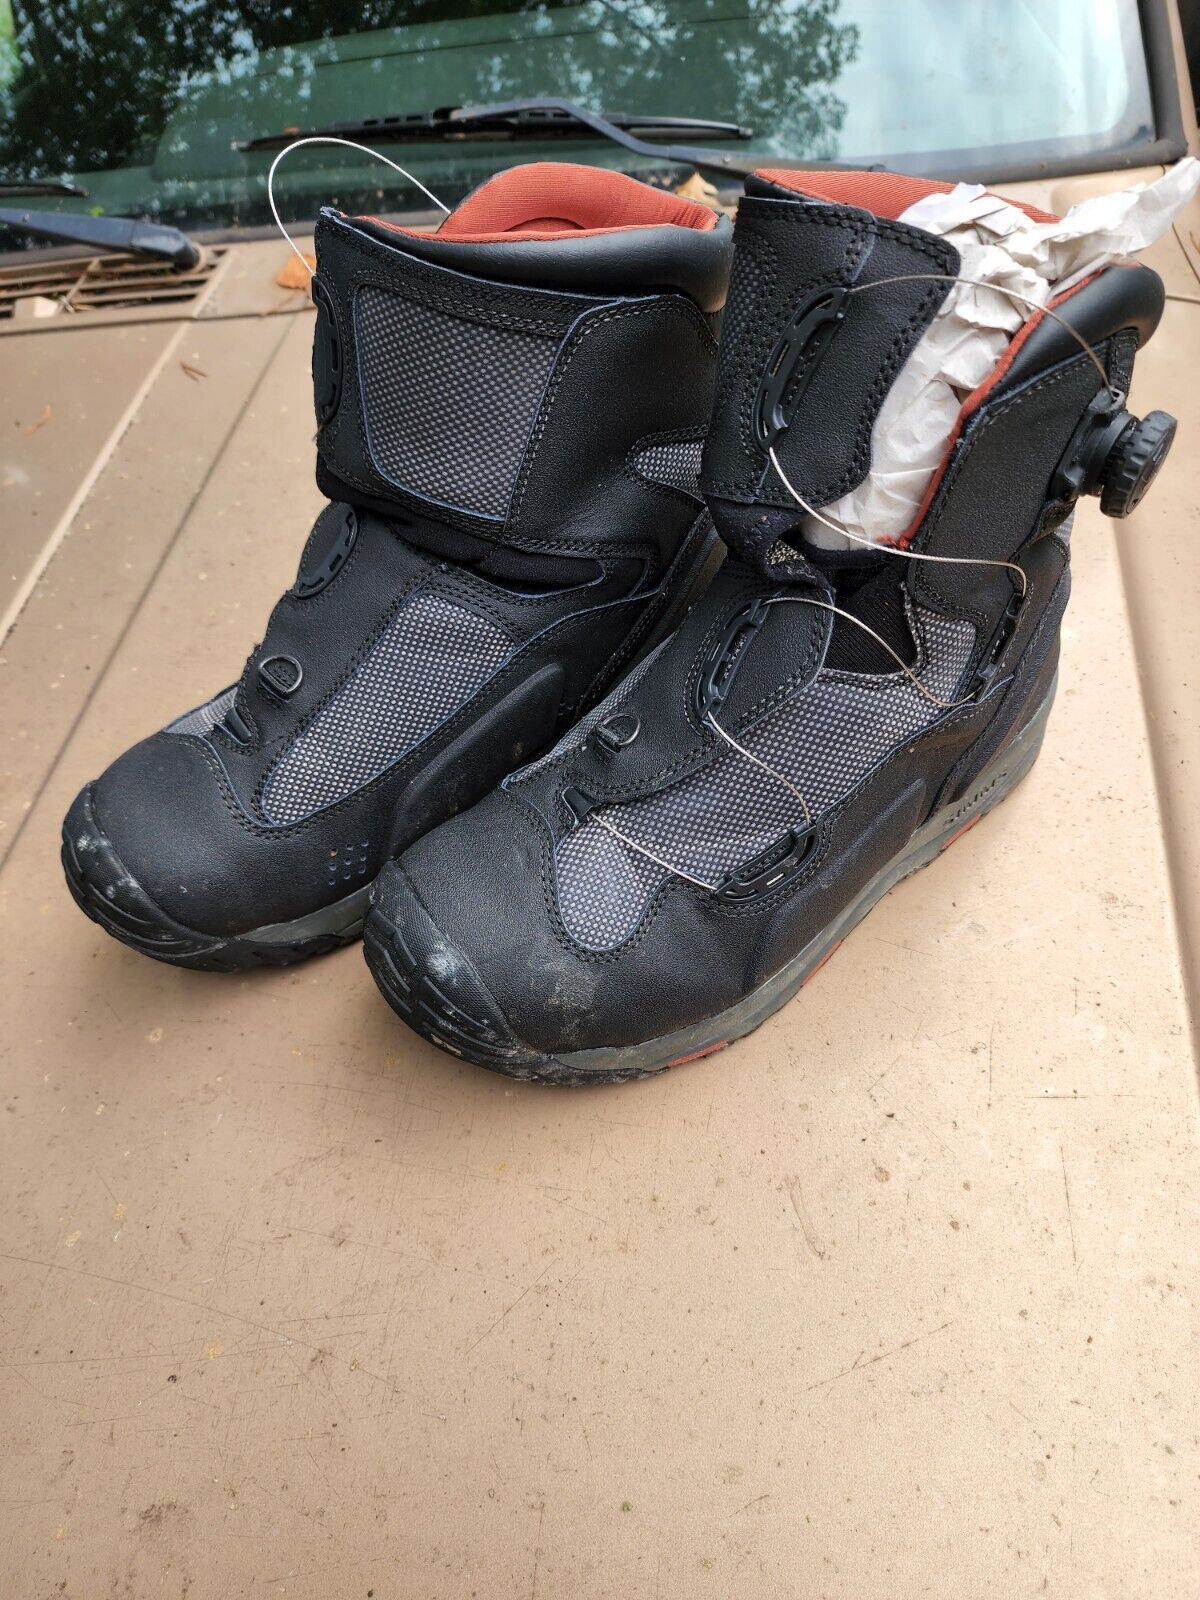 Simms G4 Boa Wading Boot Size 13 With Extras